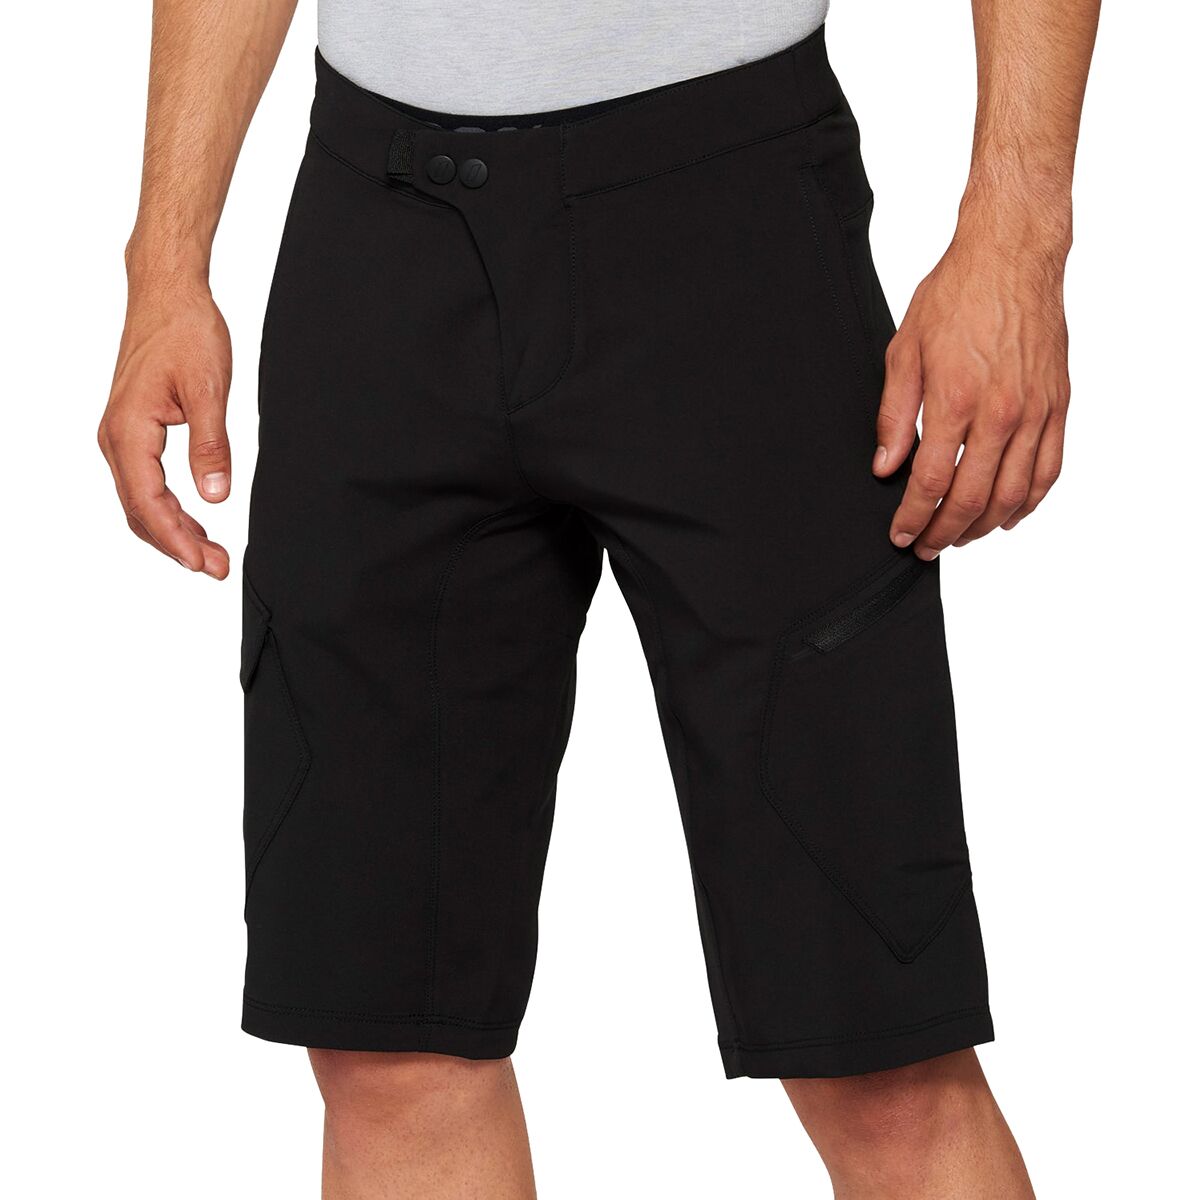 100% RideCamp Short with Liner - Men's